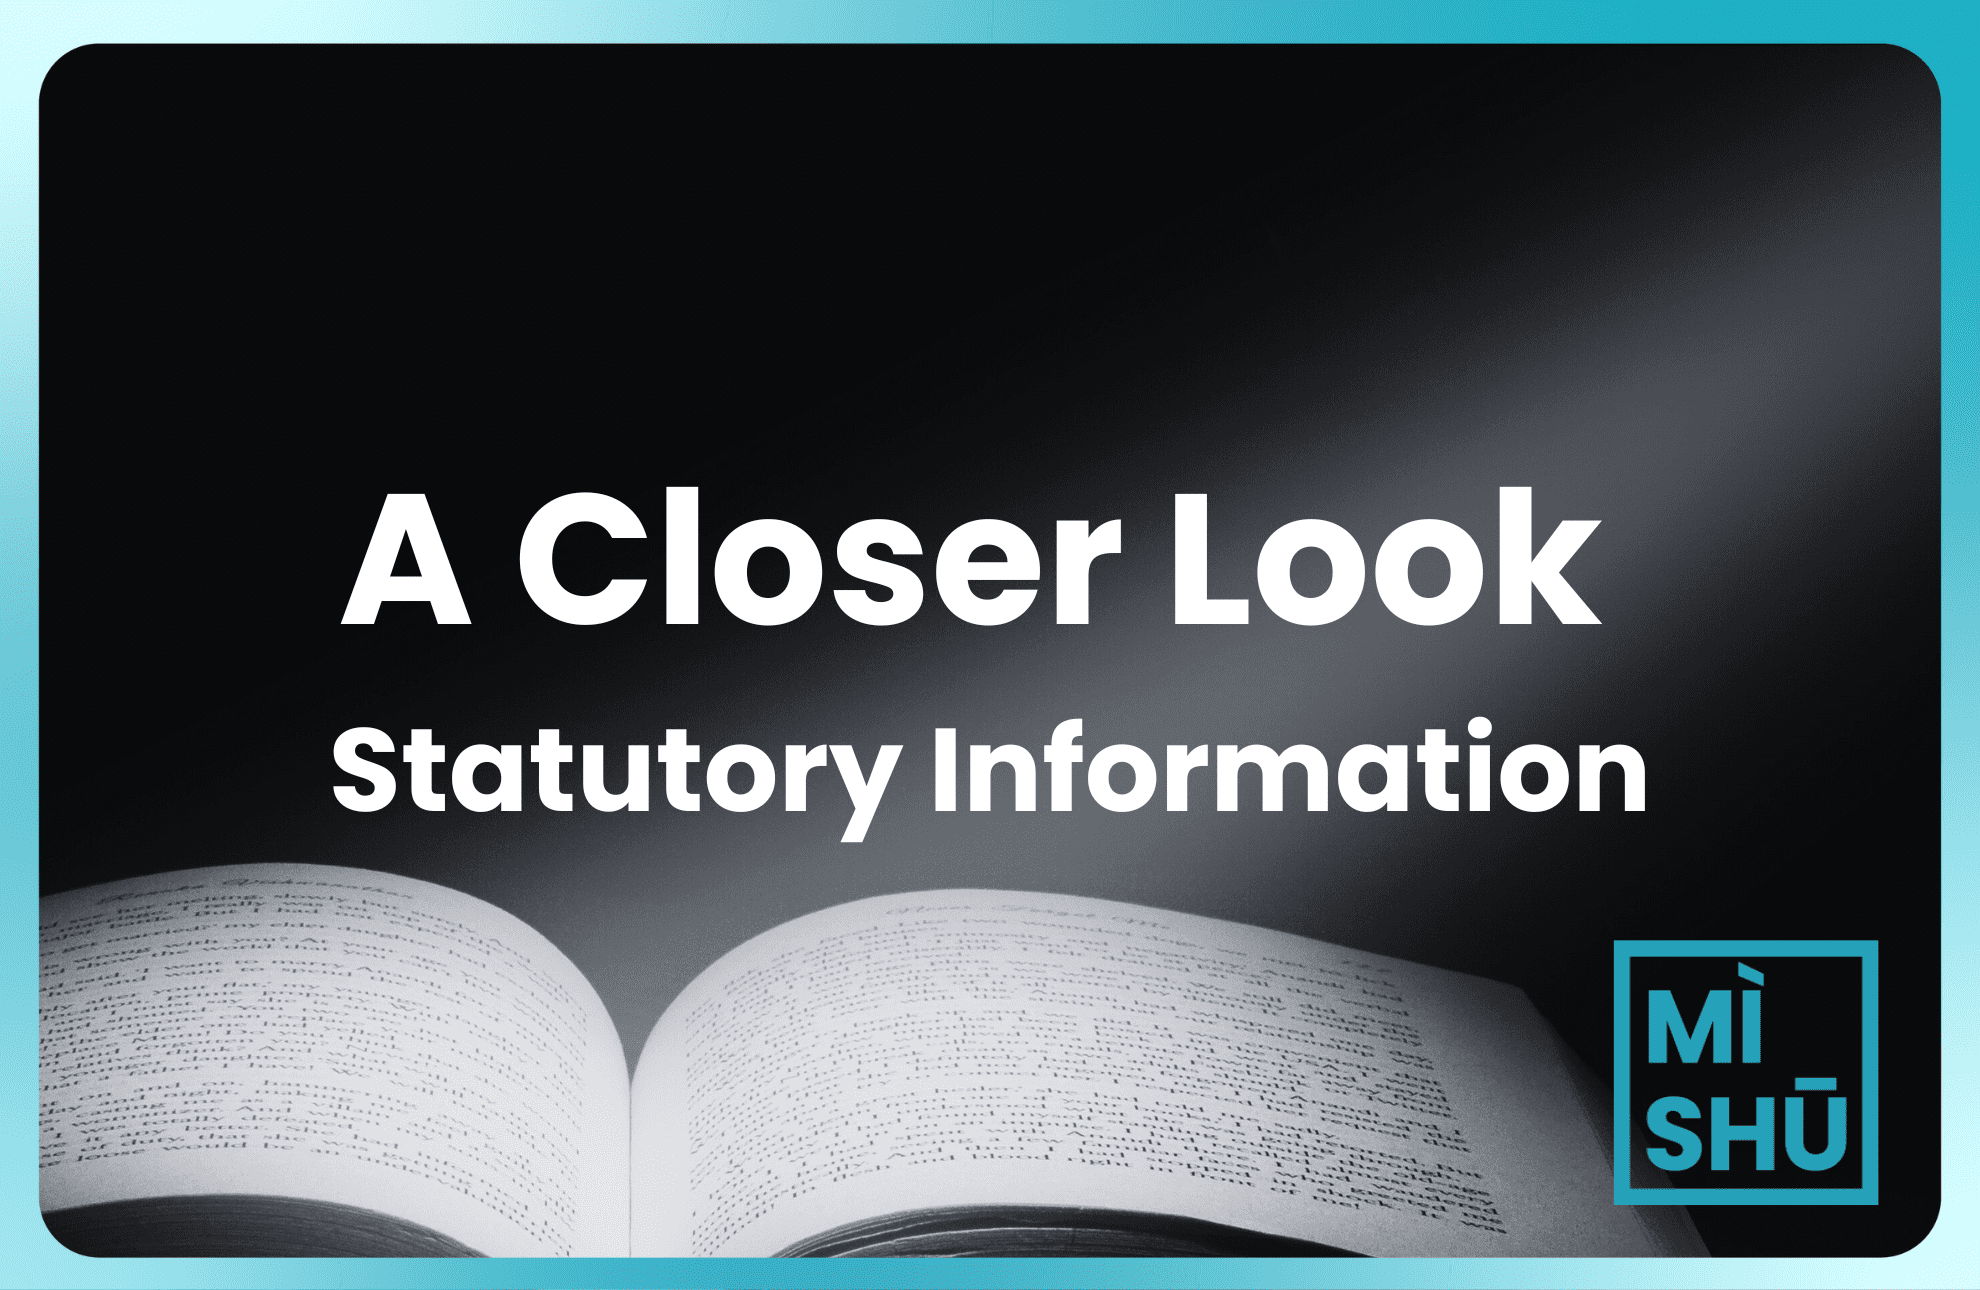 CoSec Roles Examined: Updating Company Statutory Information